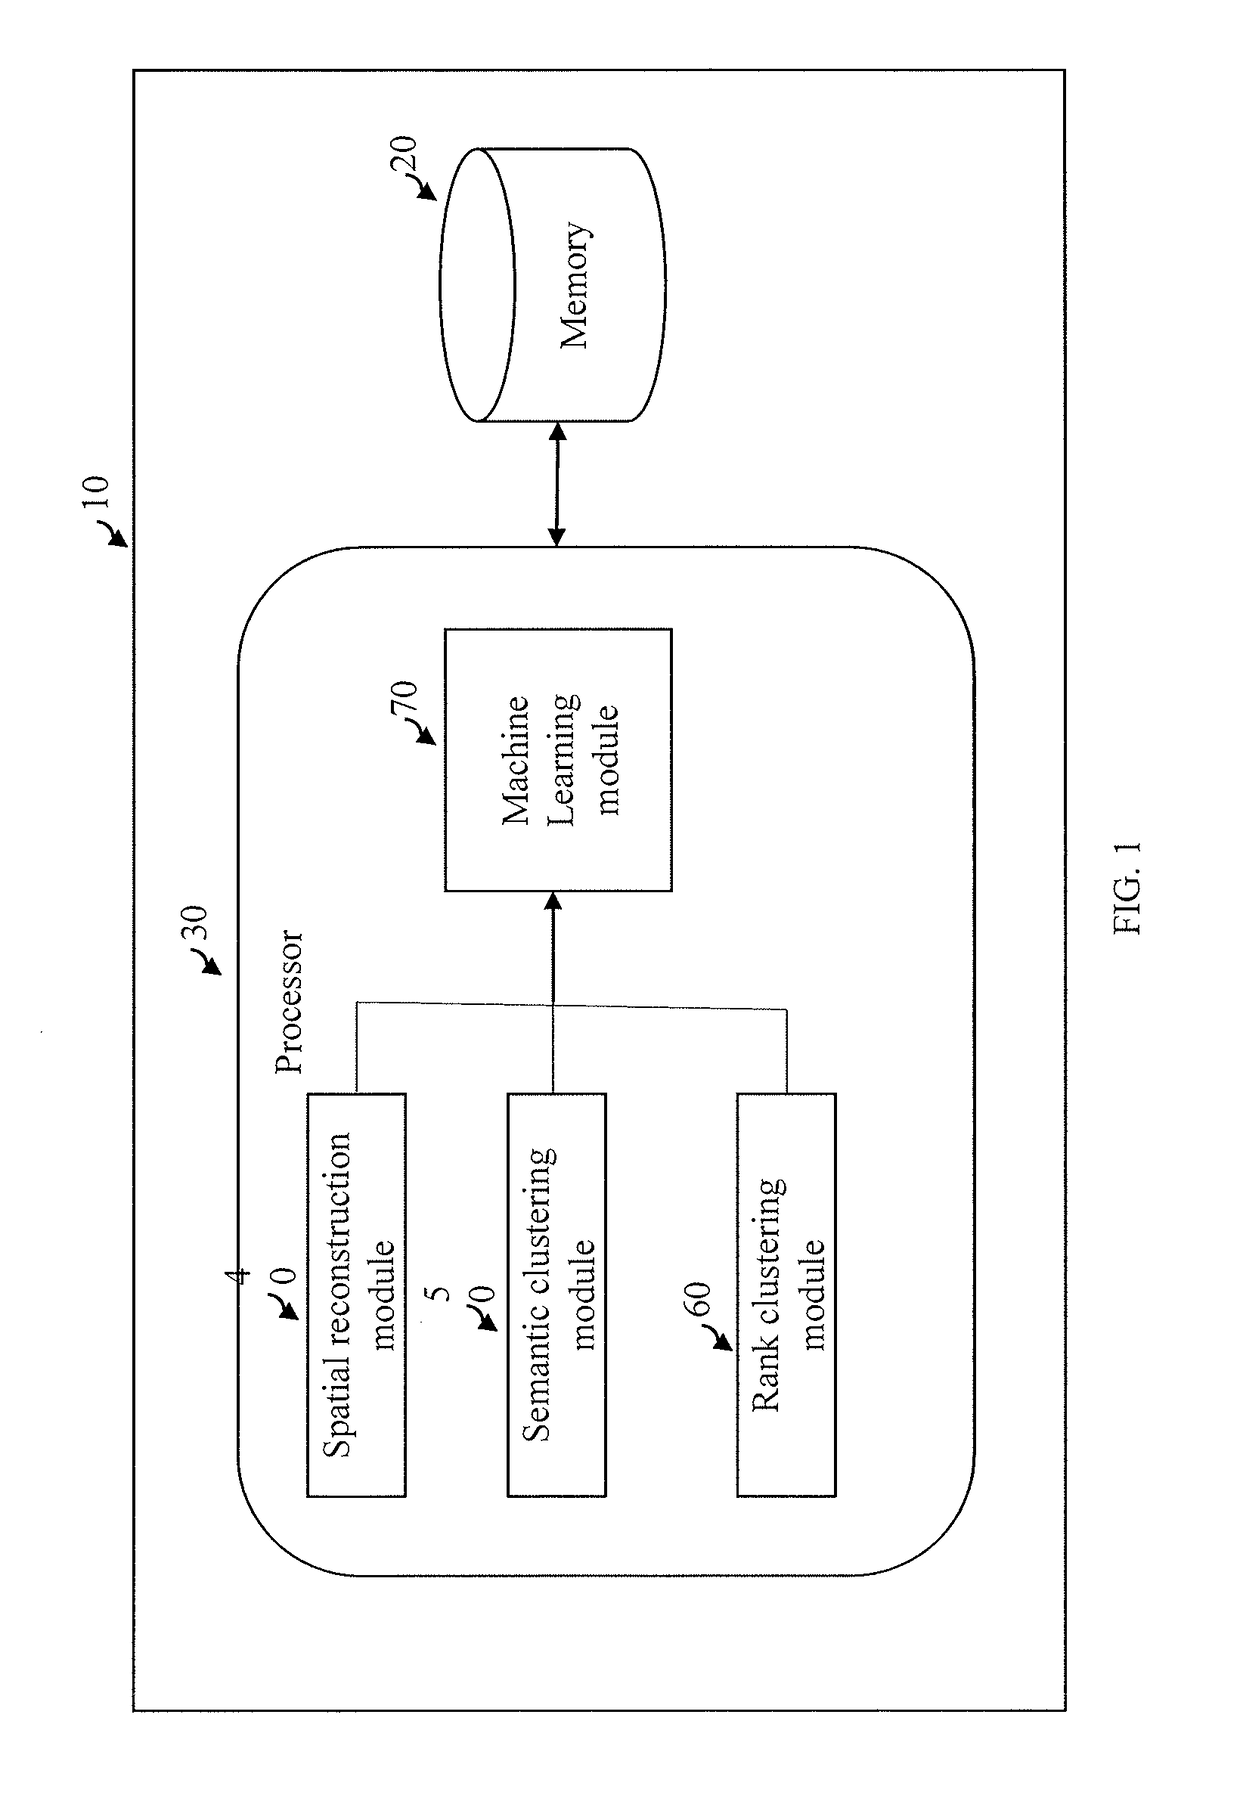 System and method for semantic textual information recognition